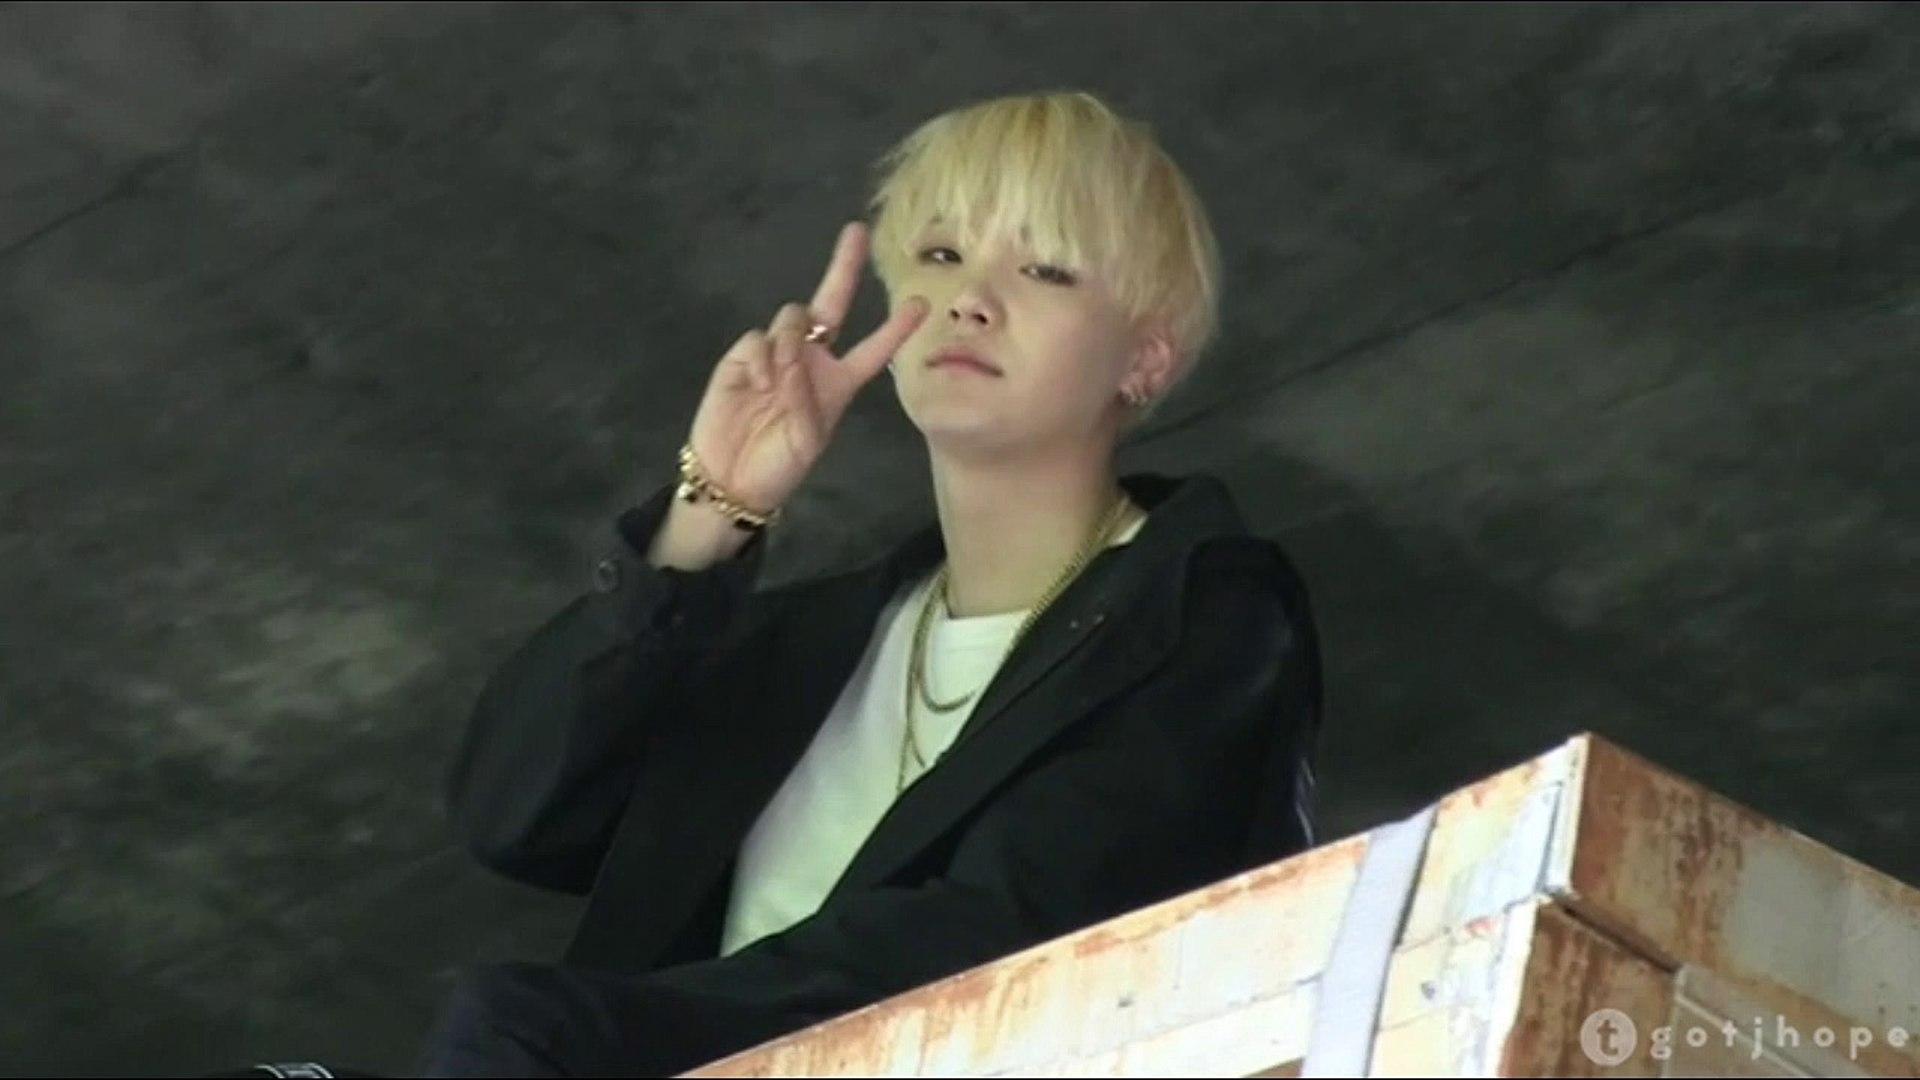 Check Out BTS' Suga's Mixtape Under the Name Agust D